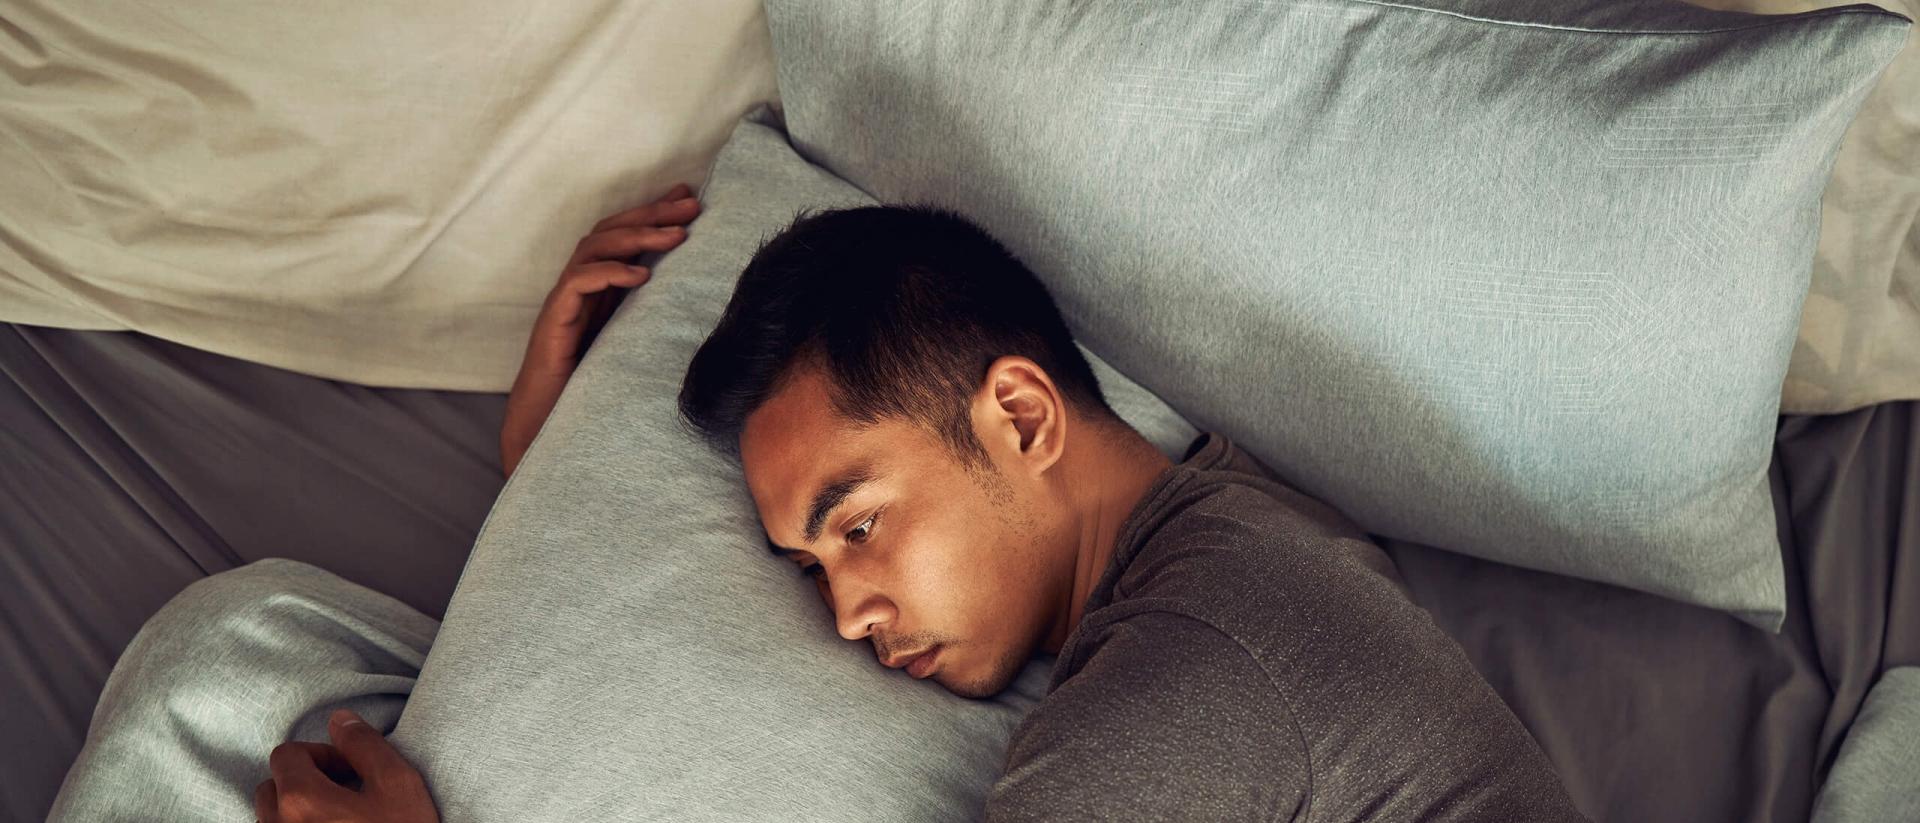 A man appears stressed while hugging and laying his head on a pillow.